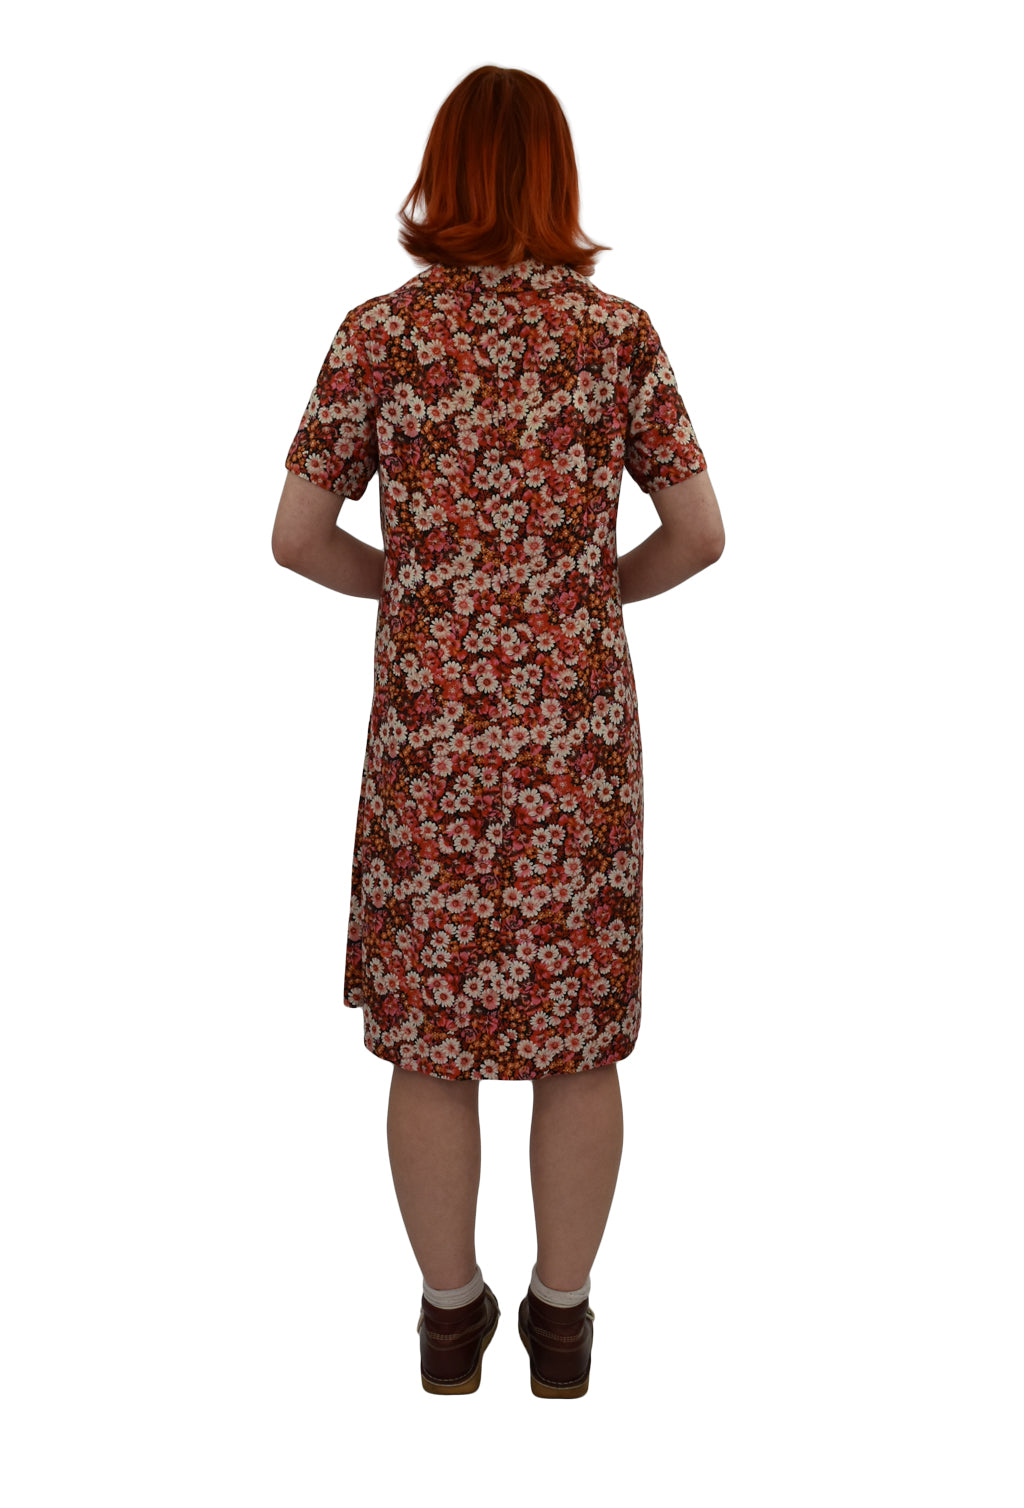 1970’s Zip Front Floral Dress With Dagger Collars | Vintage